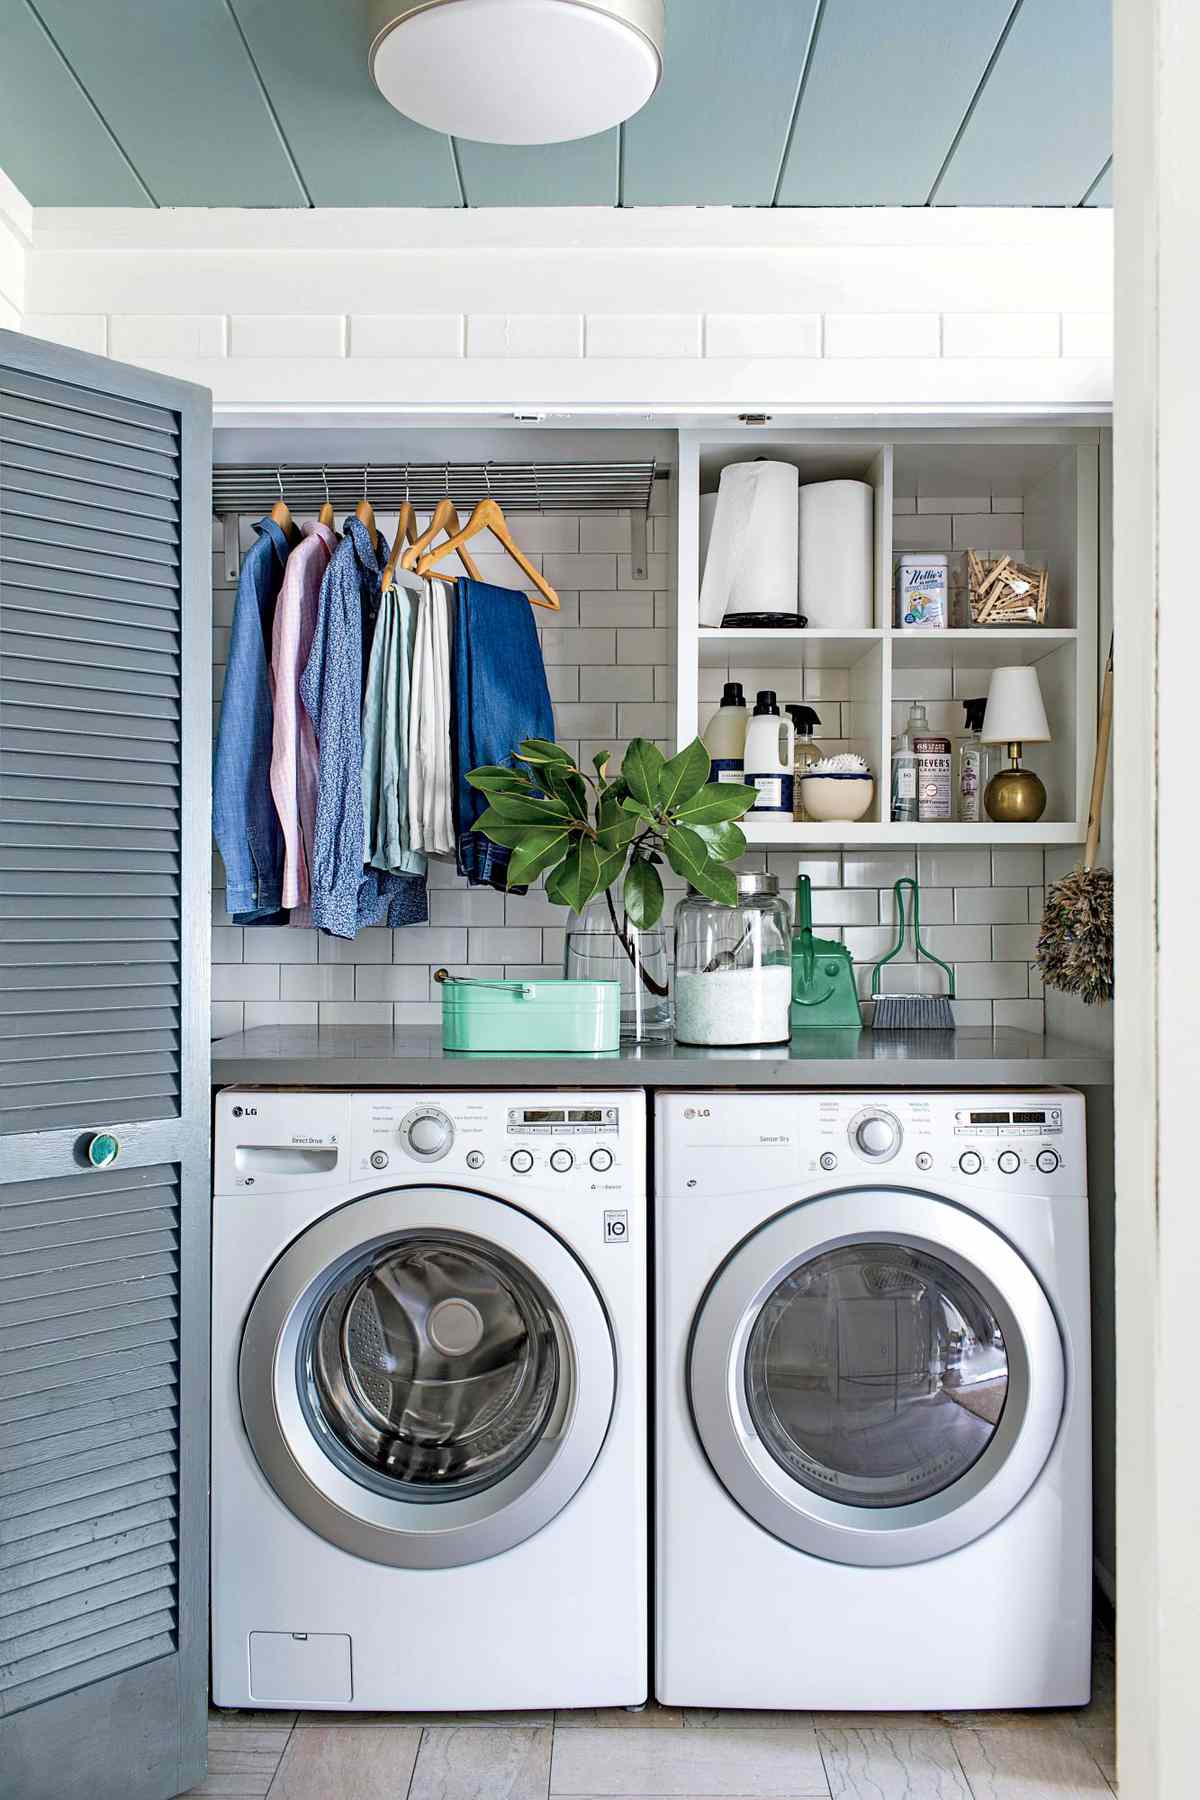 Laundry Room with Blue Doors